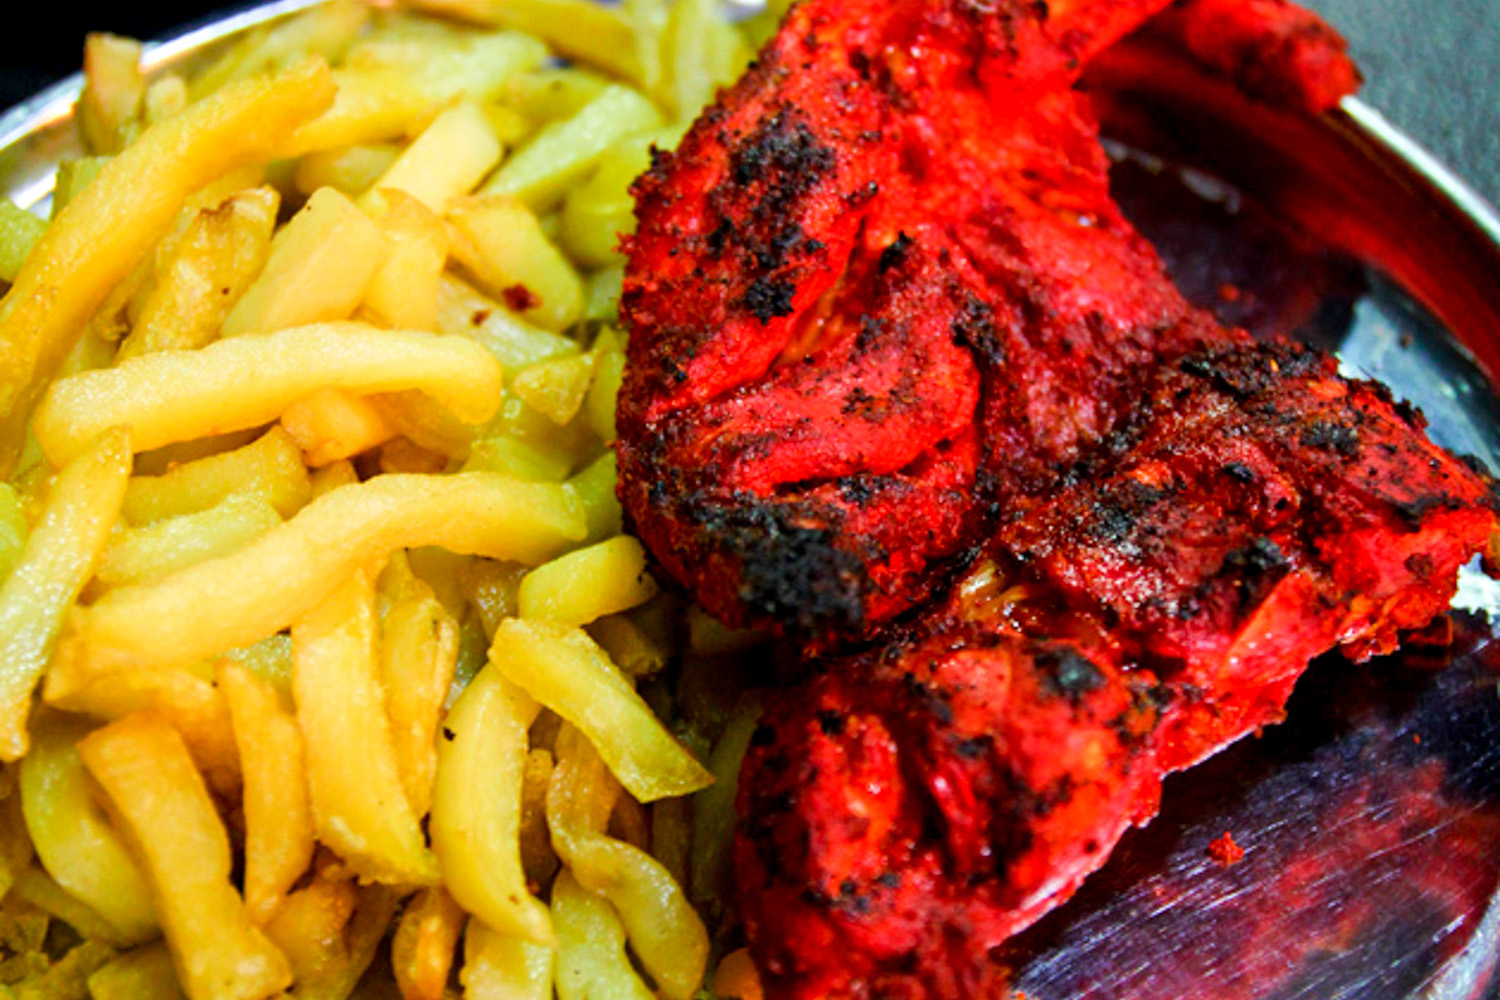 Similar to the South Asian Chicken Tikka, Sekela Chicken is available at every street corner and Dar-es-Salaam.